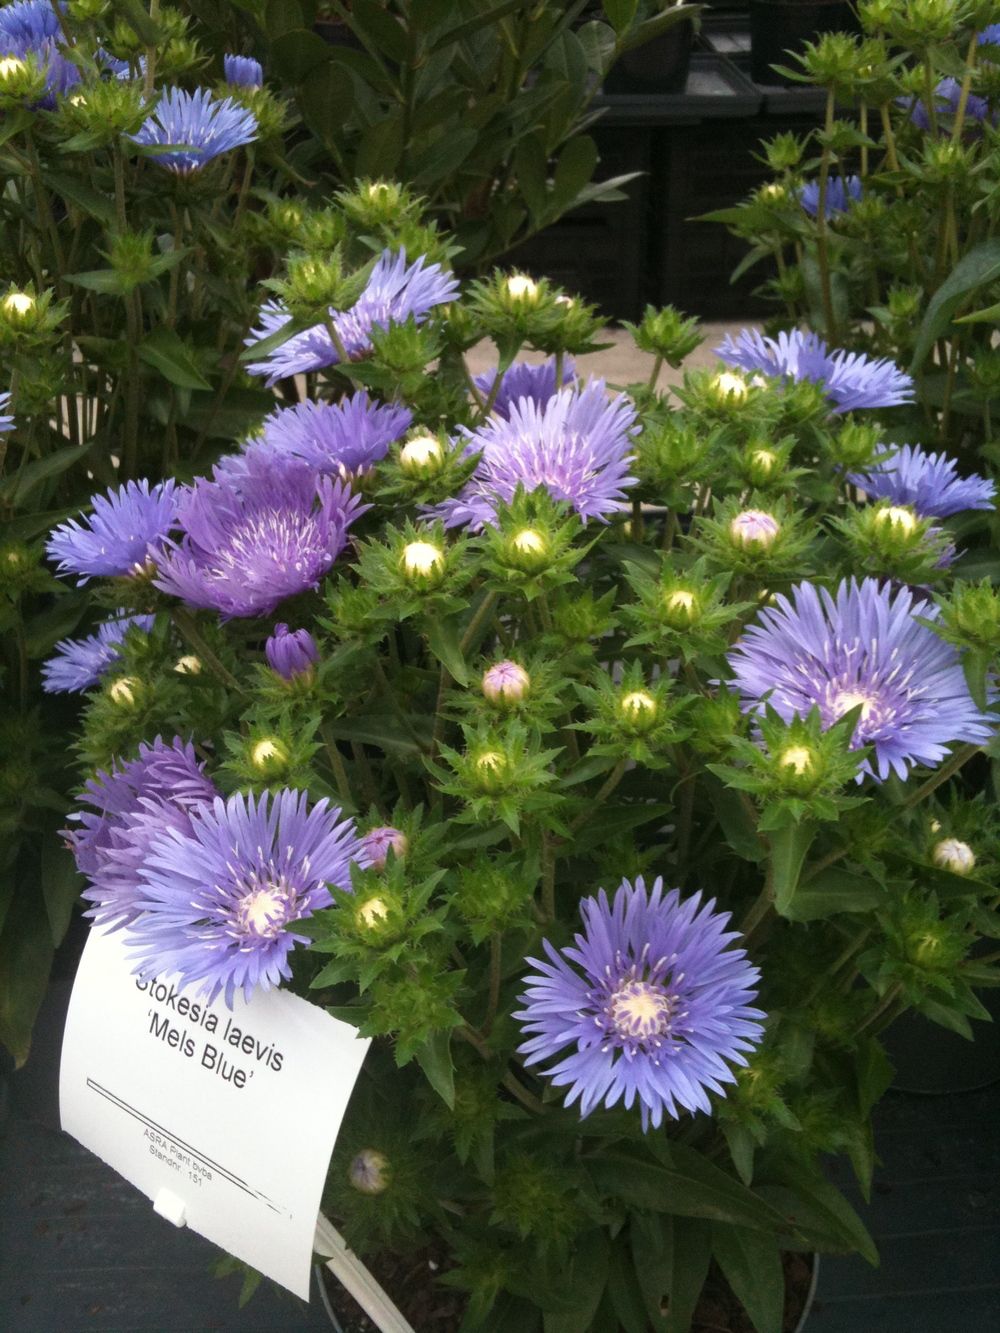 images/plants/stokesia/sto-mels-blue/sto-mels-blue-0007.jpg